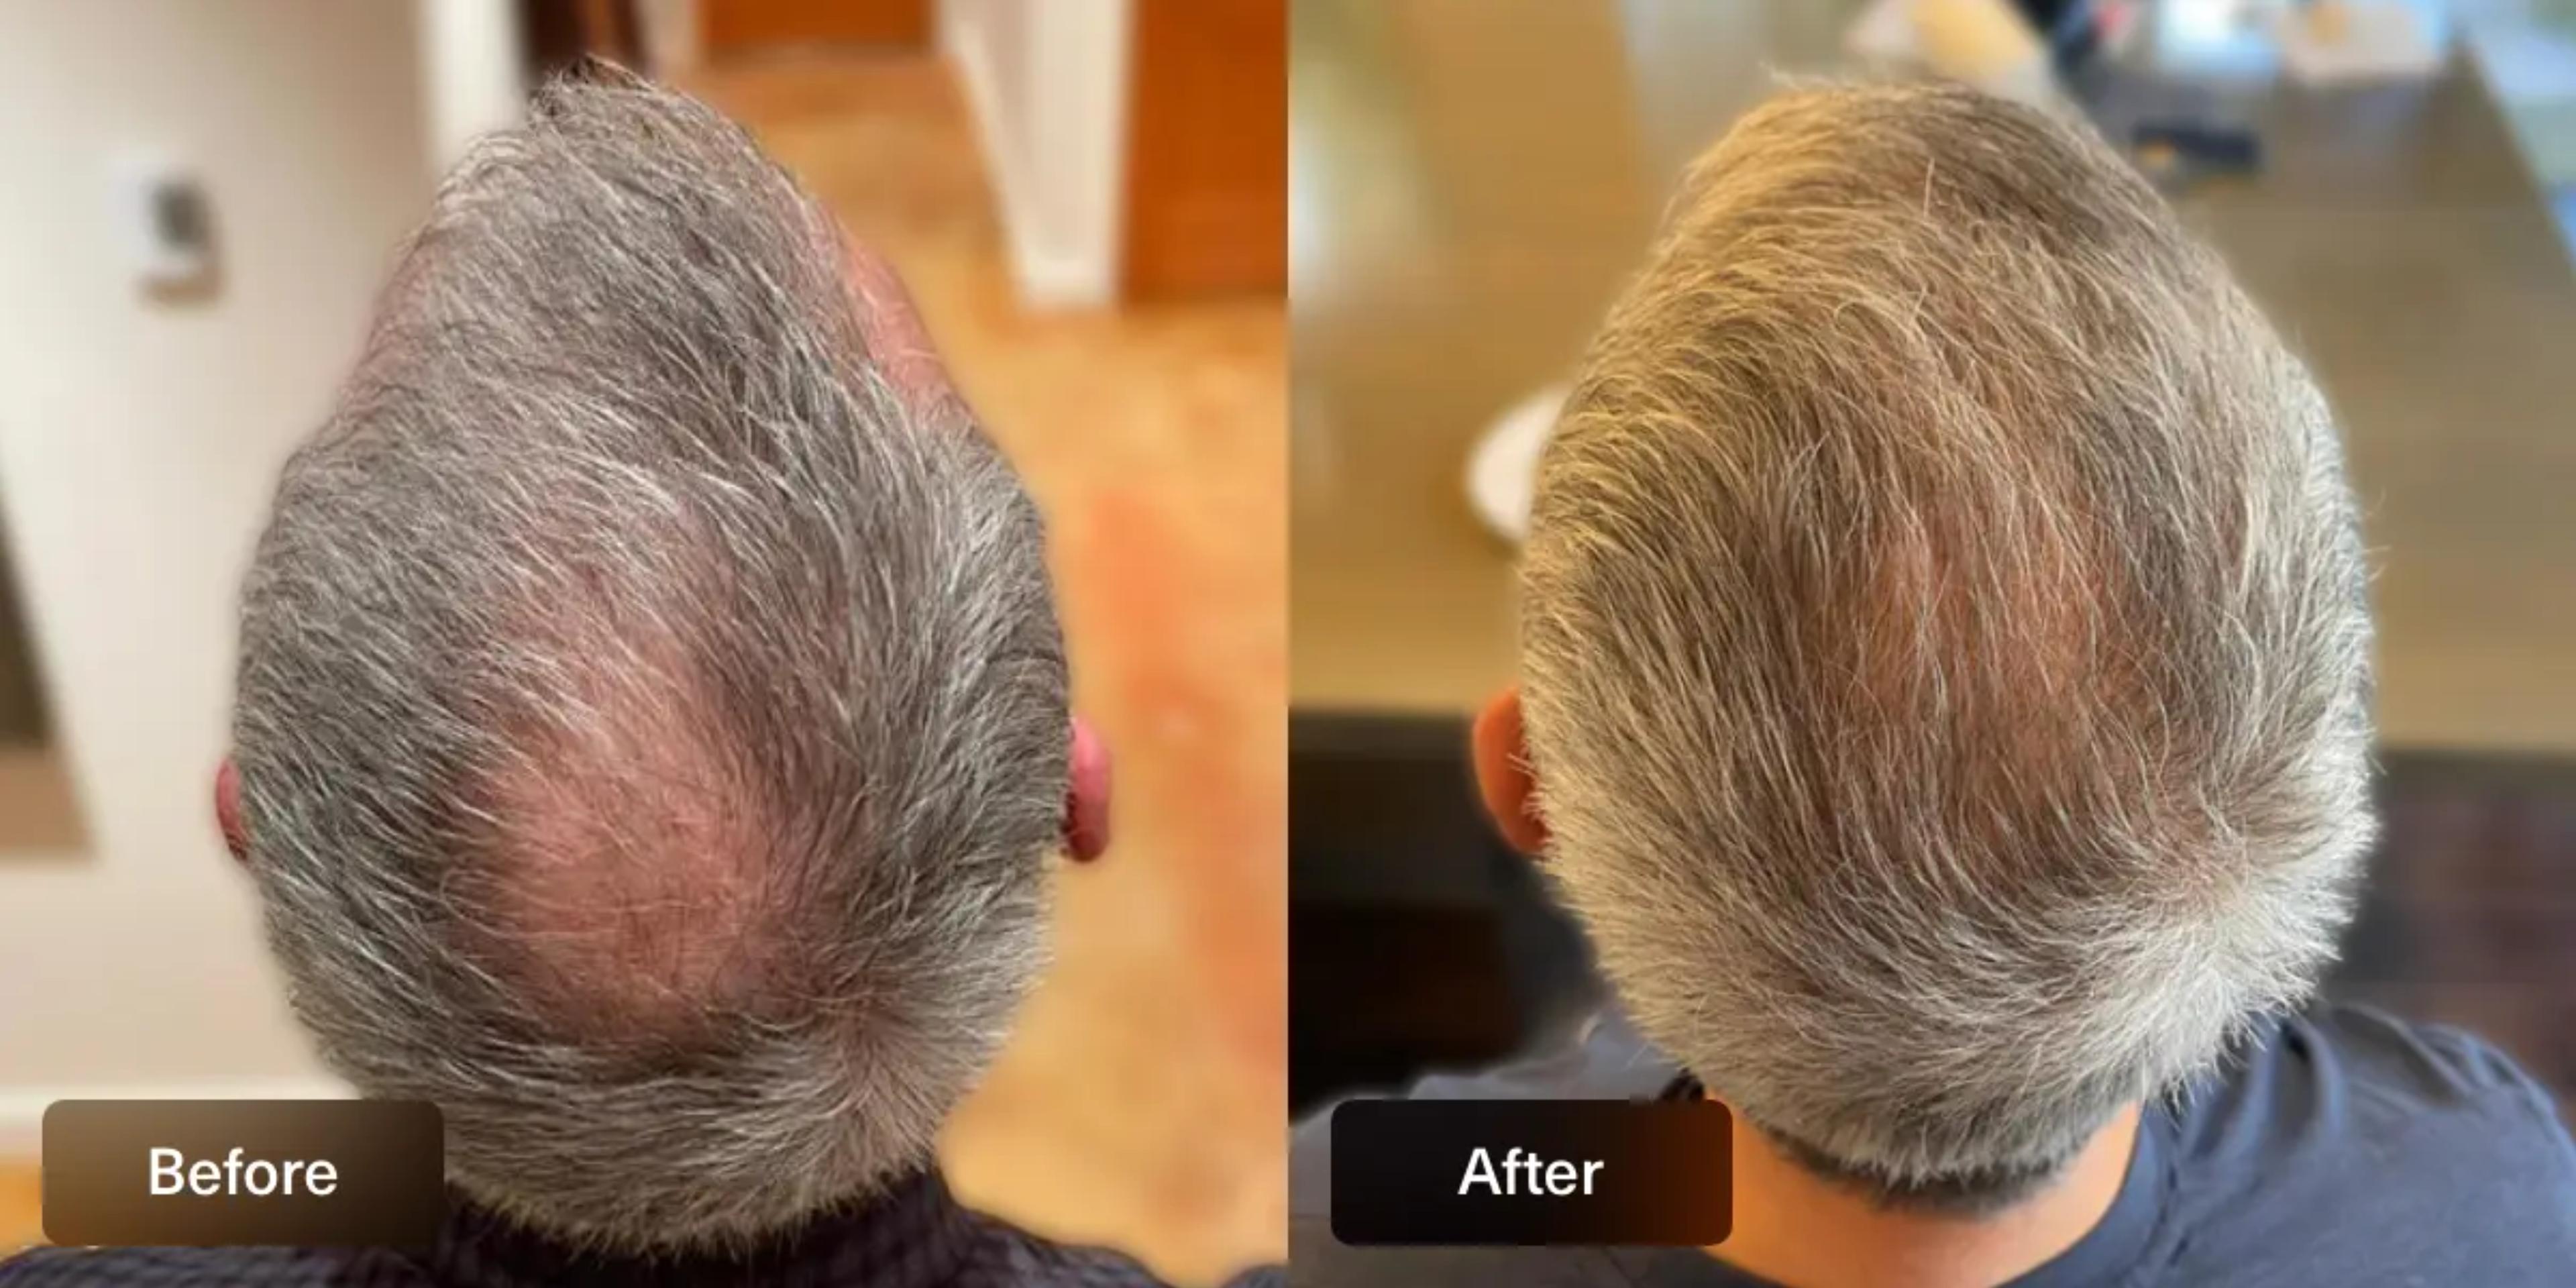 Before and After images of a XYON Topical Finasteride patient